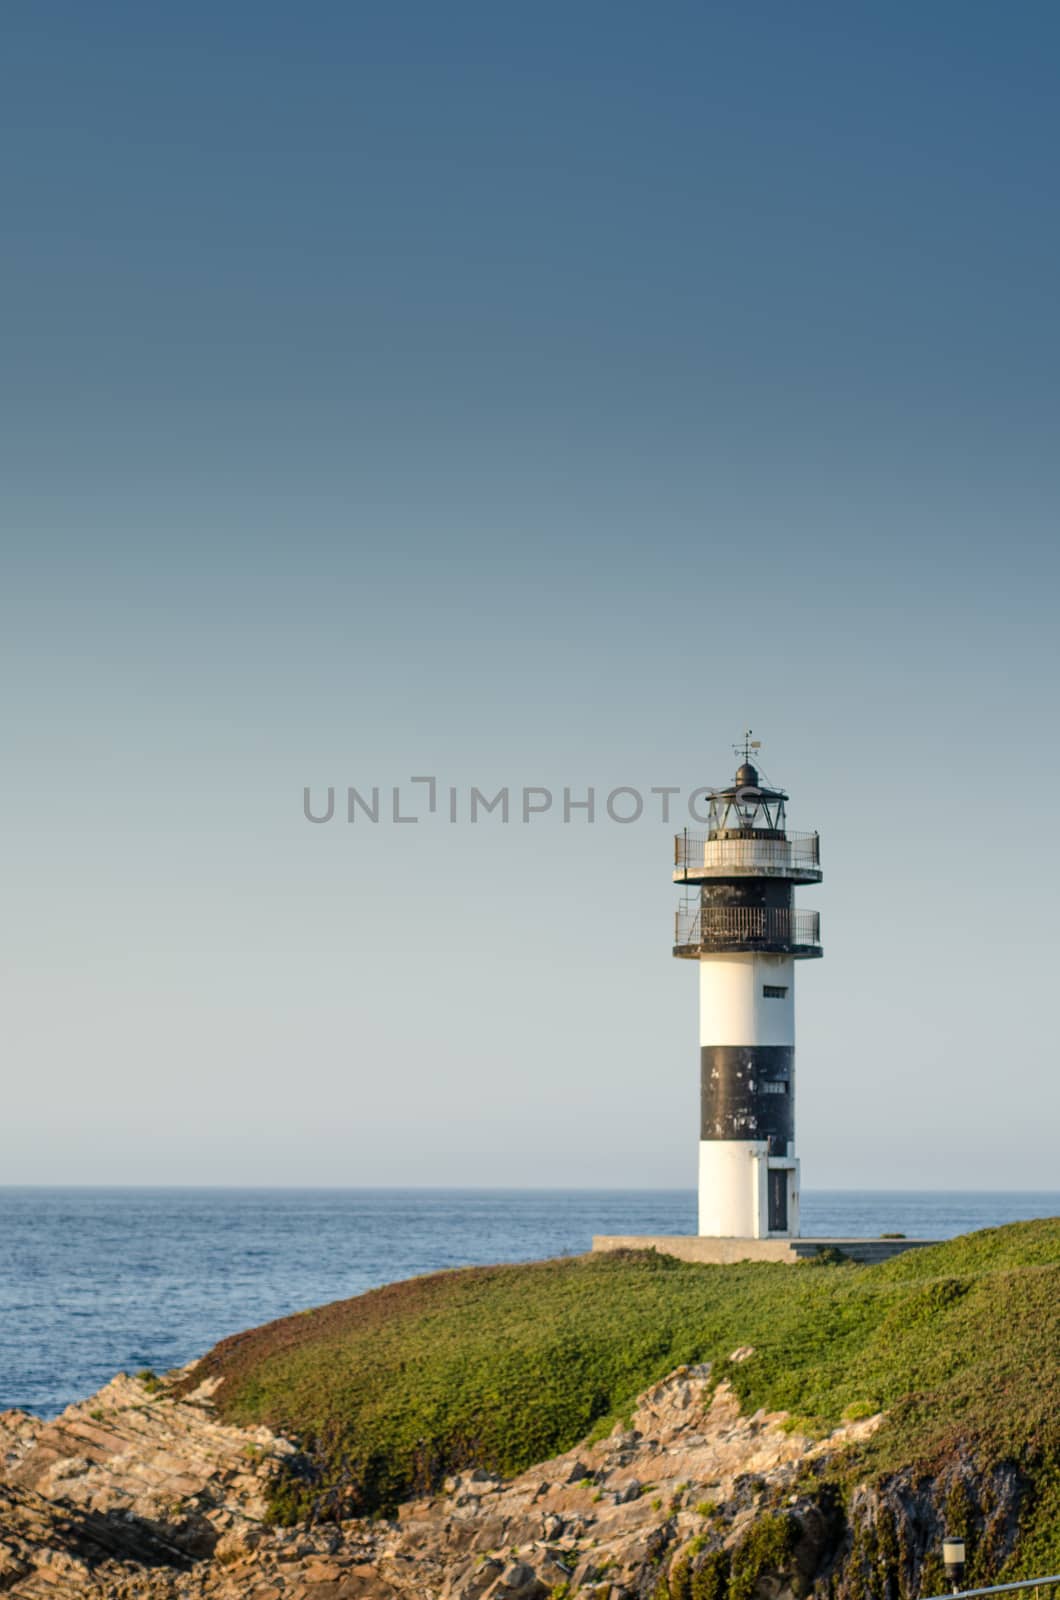 Lighthouse in a shiny day by mikelju